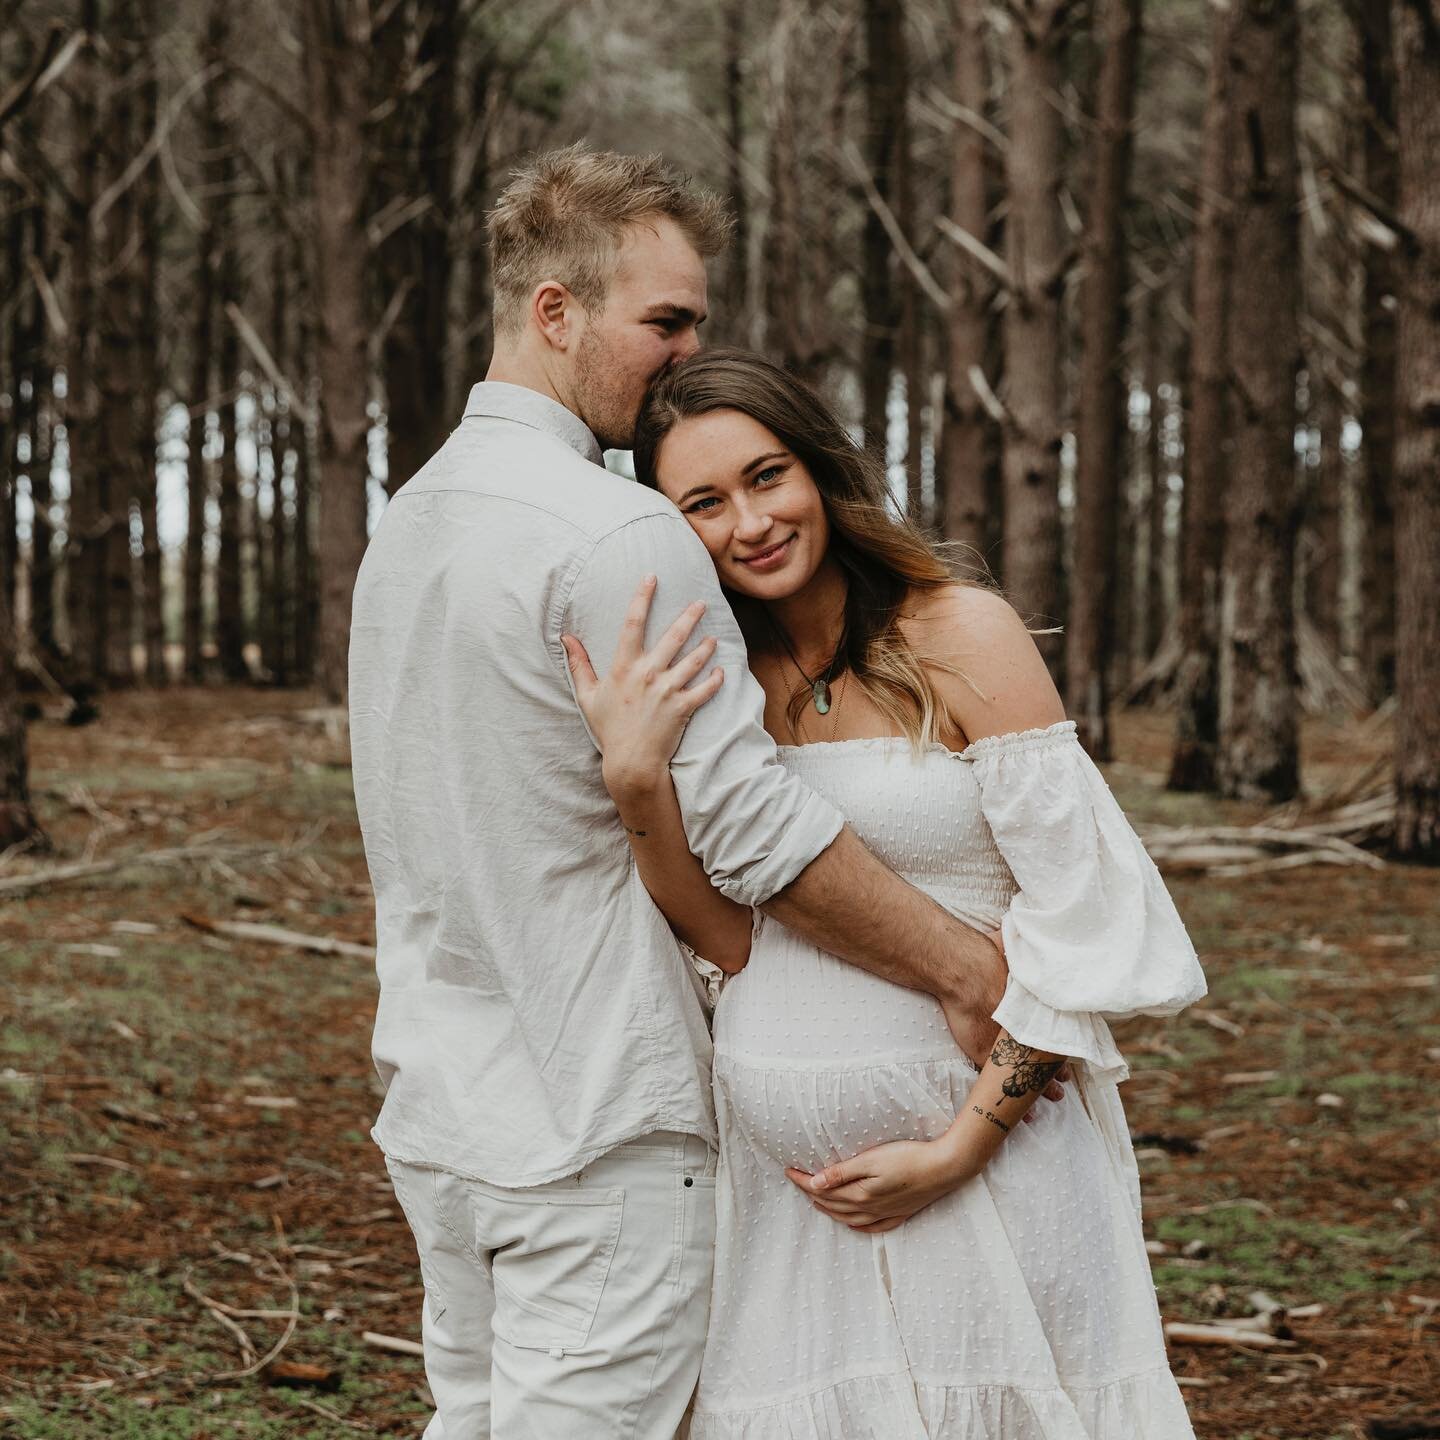 Magical maternity session with the lovely Amanda, Mitch and Isla. These guys were so natural in front of the camera! It was fun shooting at Wanneroo Pines again, would love to do more sessions there 🤍✨